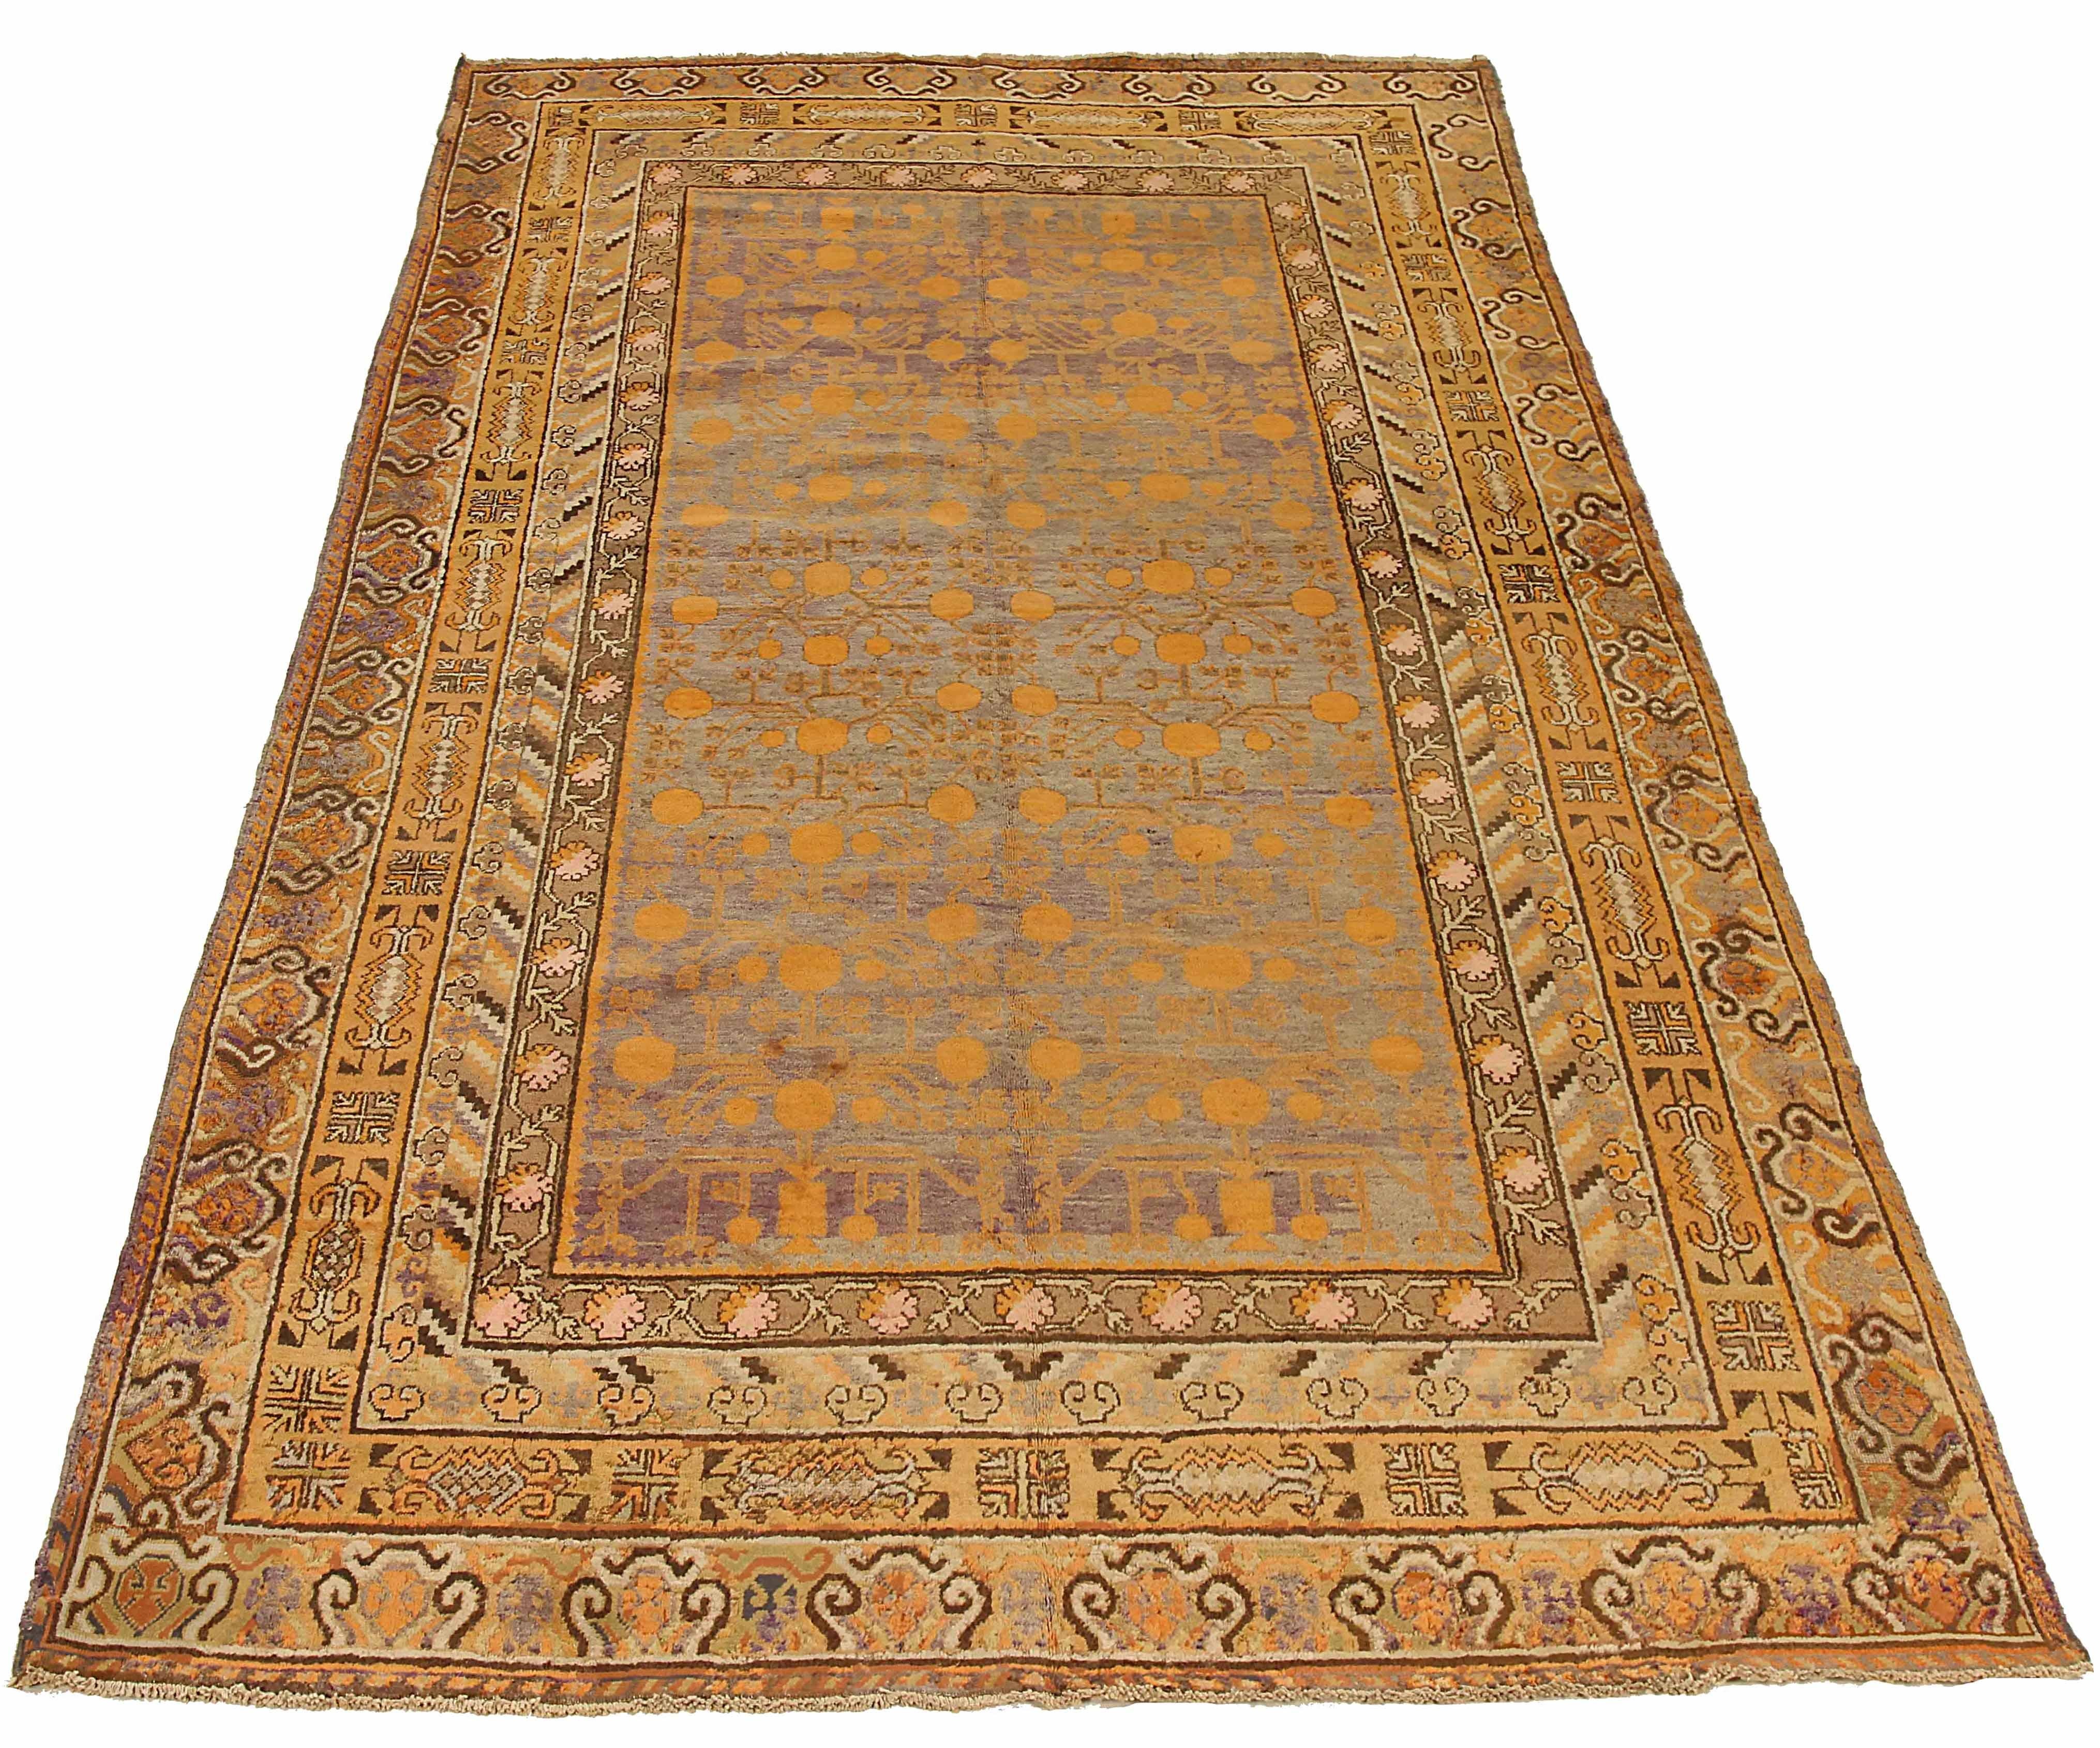 Antique Russian area rug handwoven from the finest sheep’s wool. It’s colored with all-natural vegetable dyes that are safe for humans and pets. It’s a traditional Khotan design handwoven by expert artisans. It’s a lovely area rug that can be